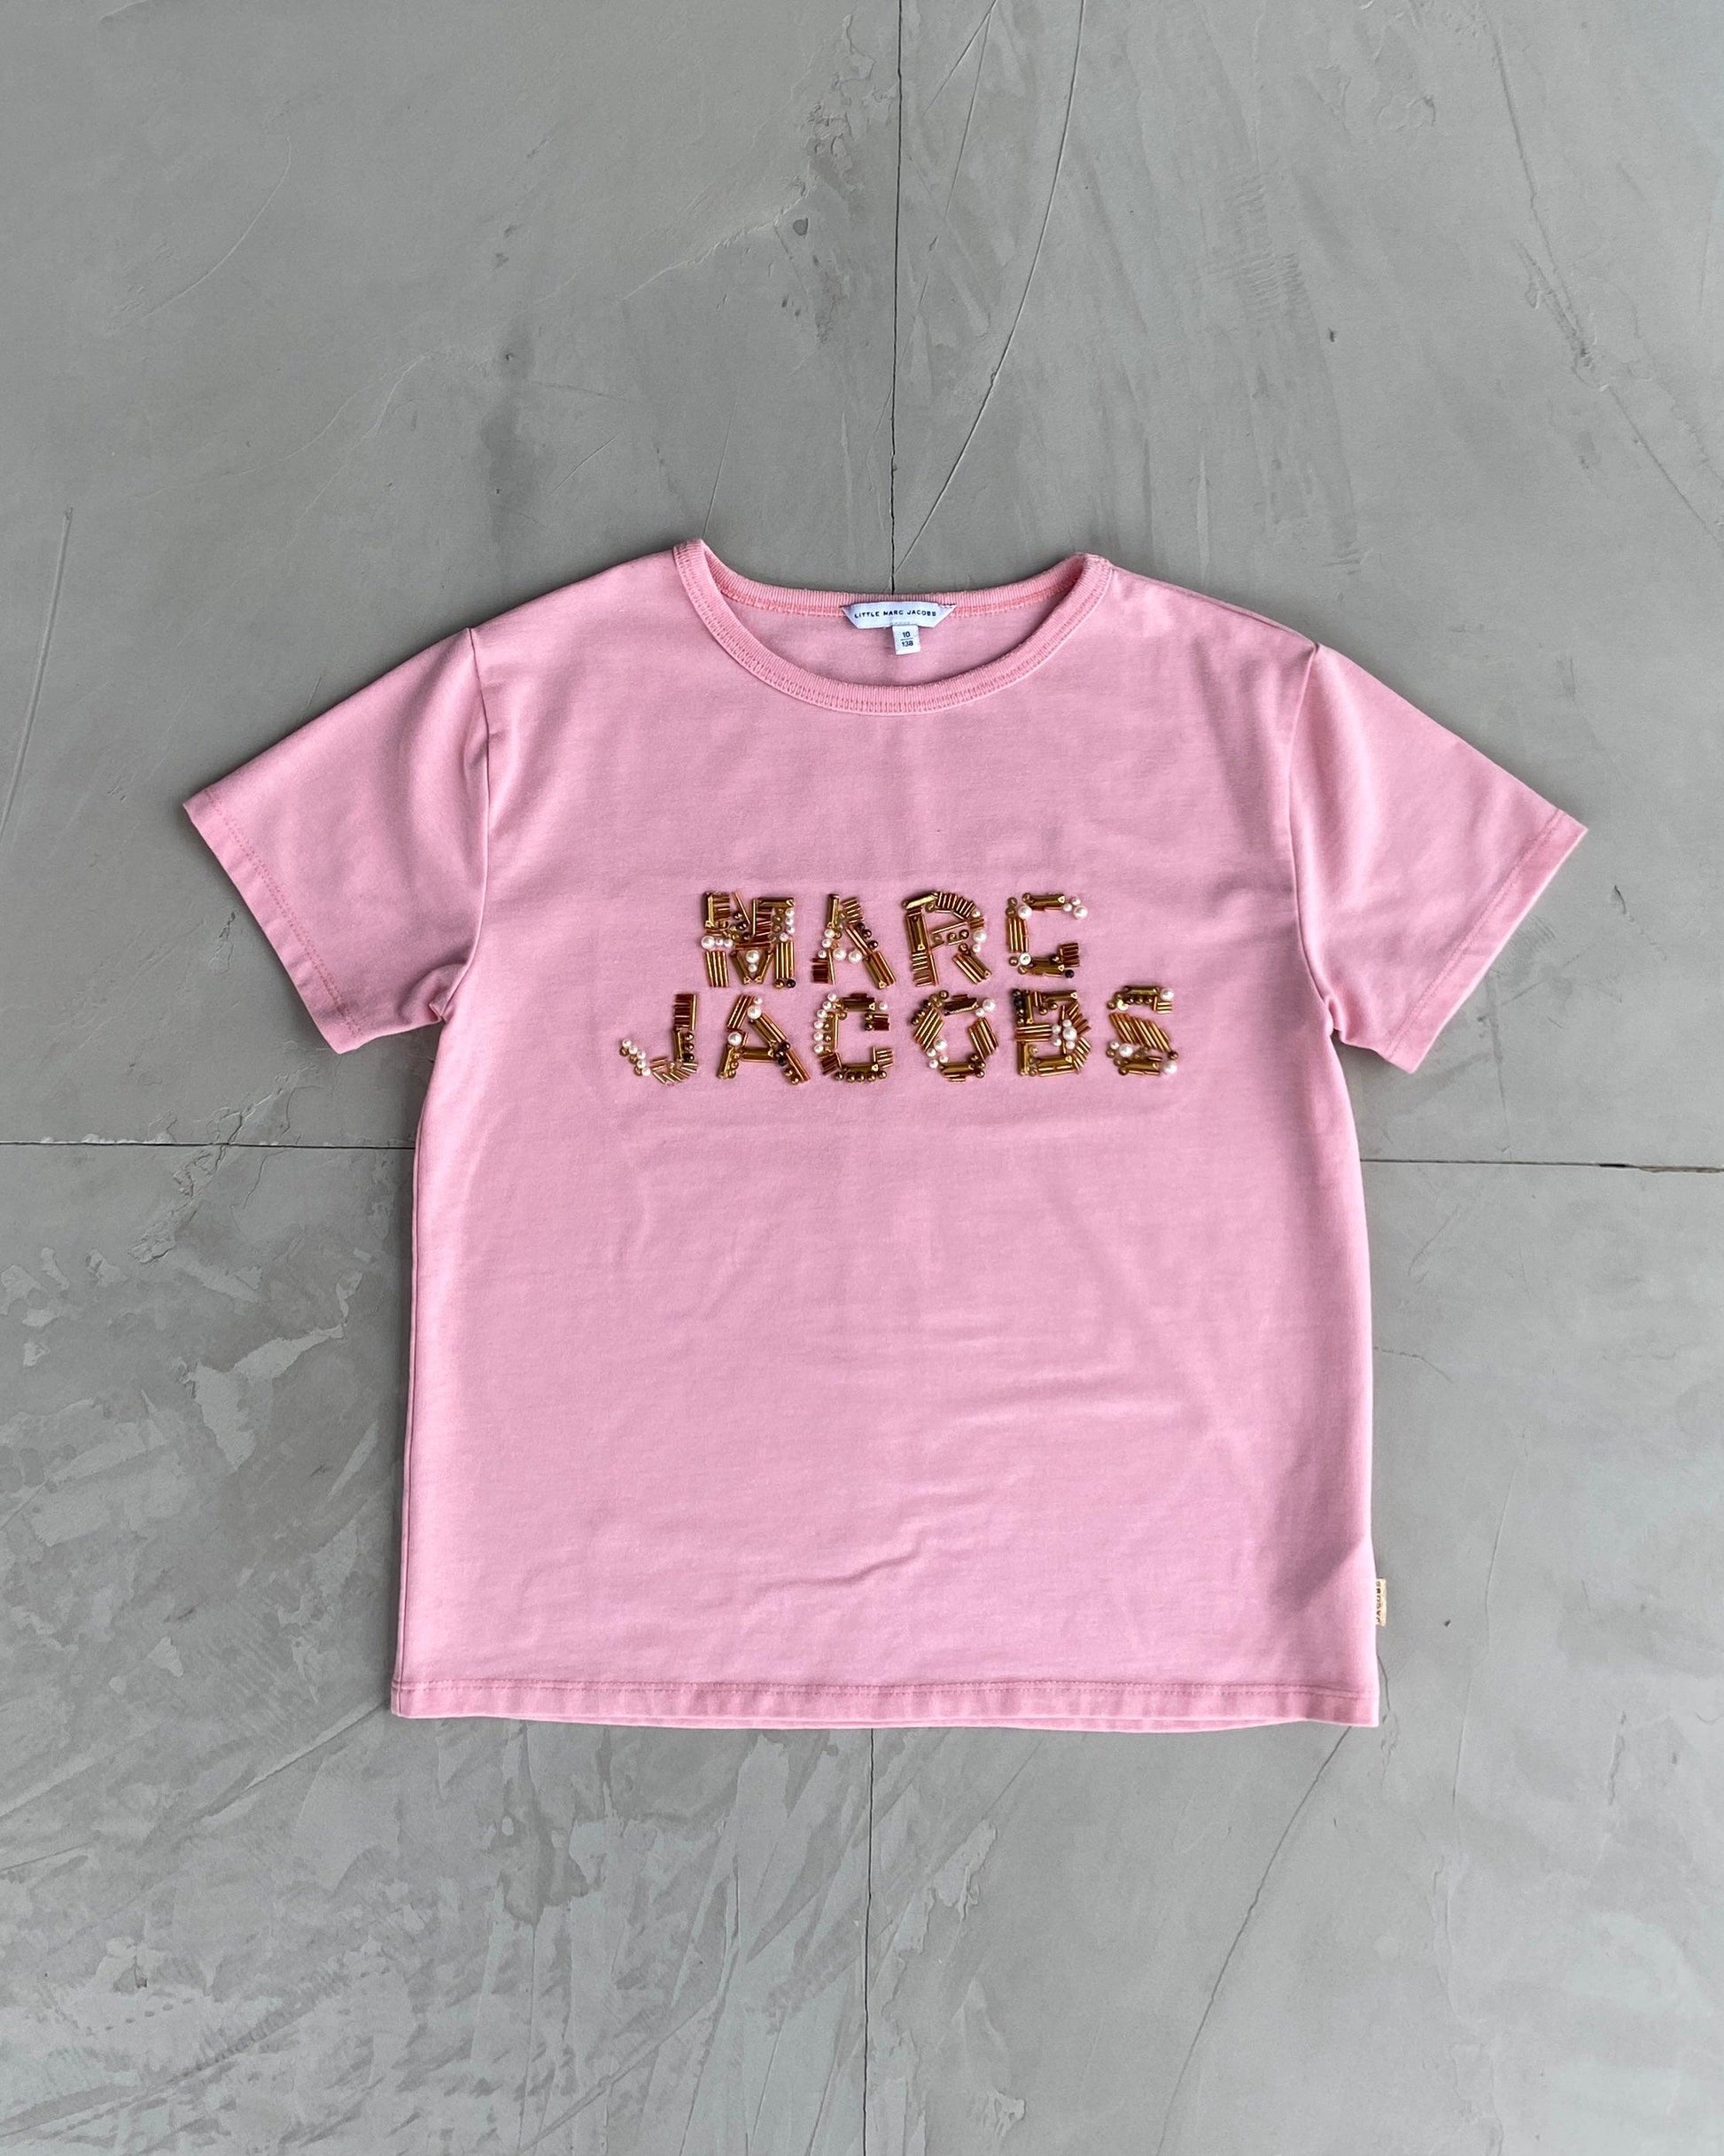 MARC JACOBS 2000'S BABY TEE - S - Known Source